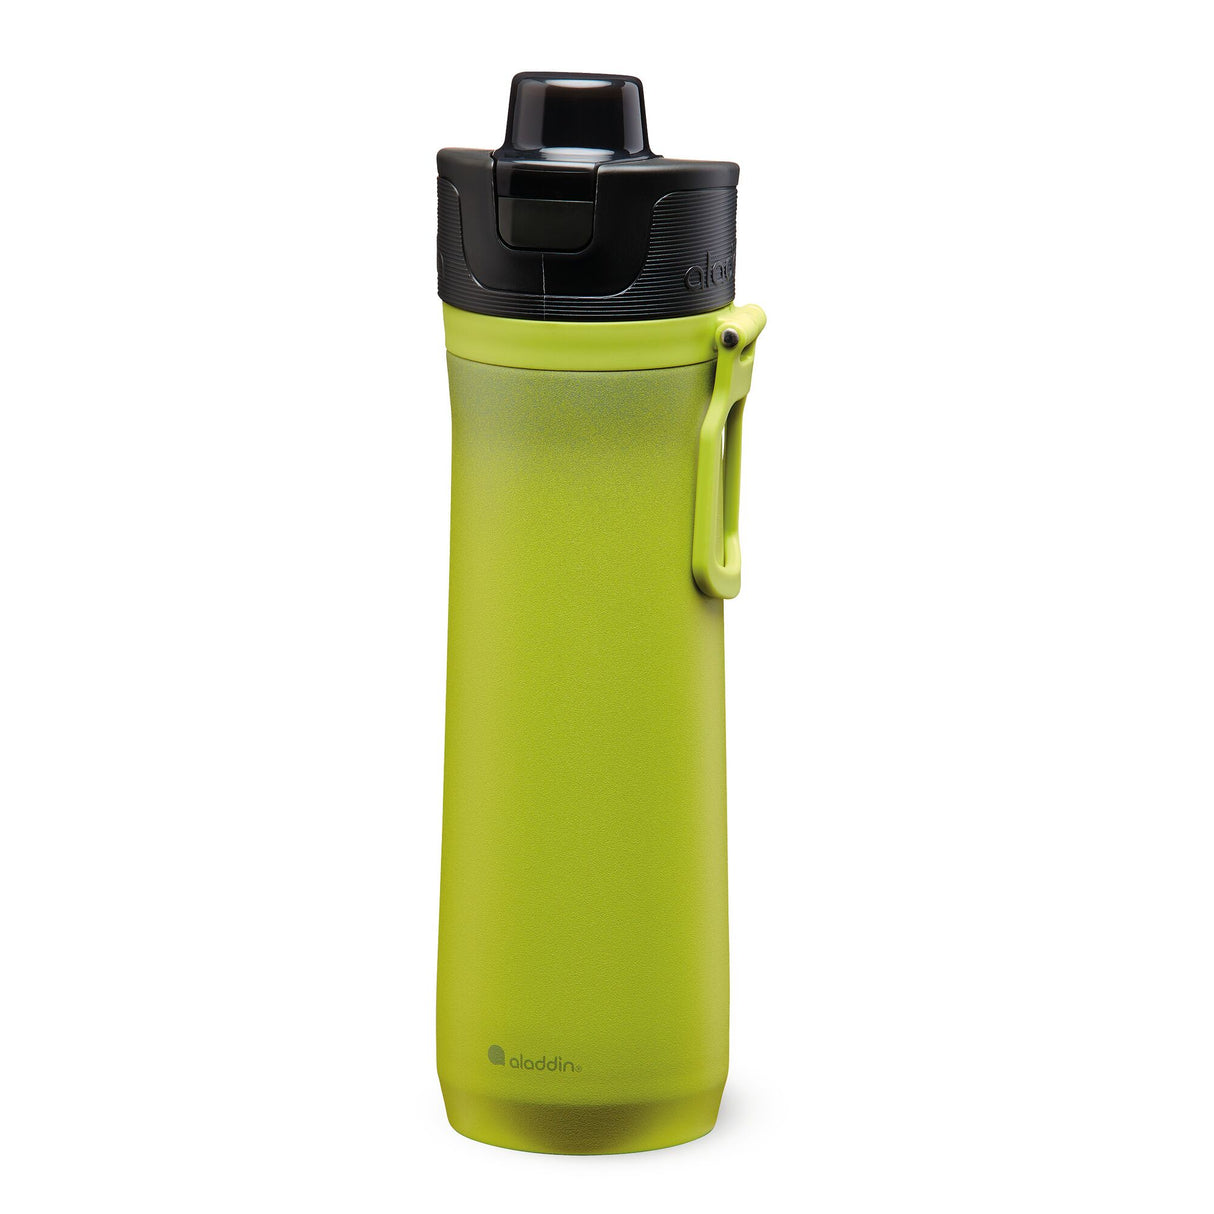 Sports Thermavac™ Stainless Steel Water Bottle